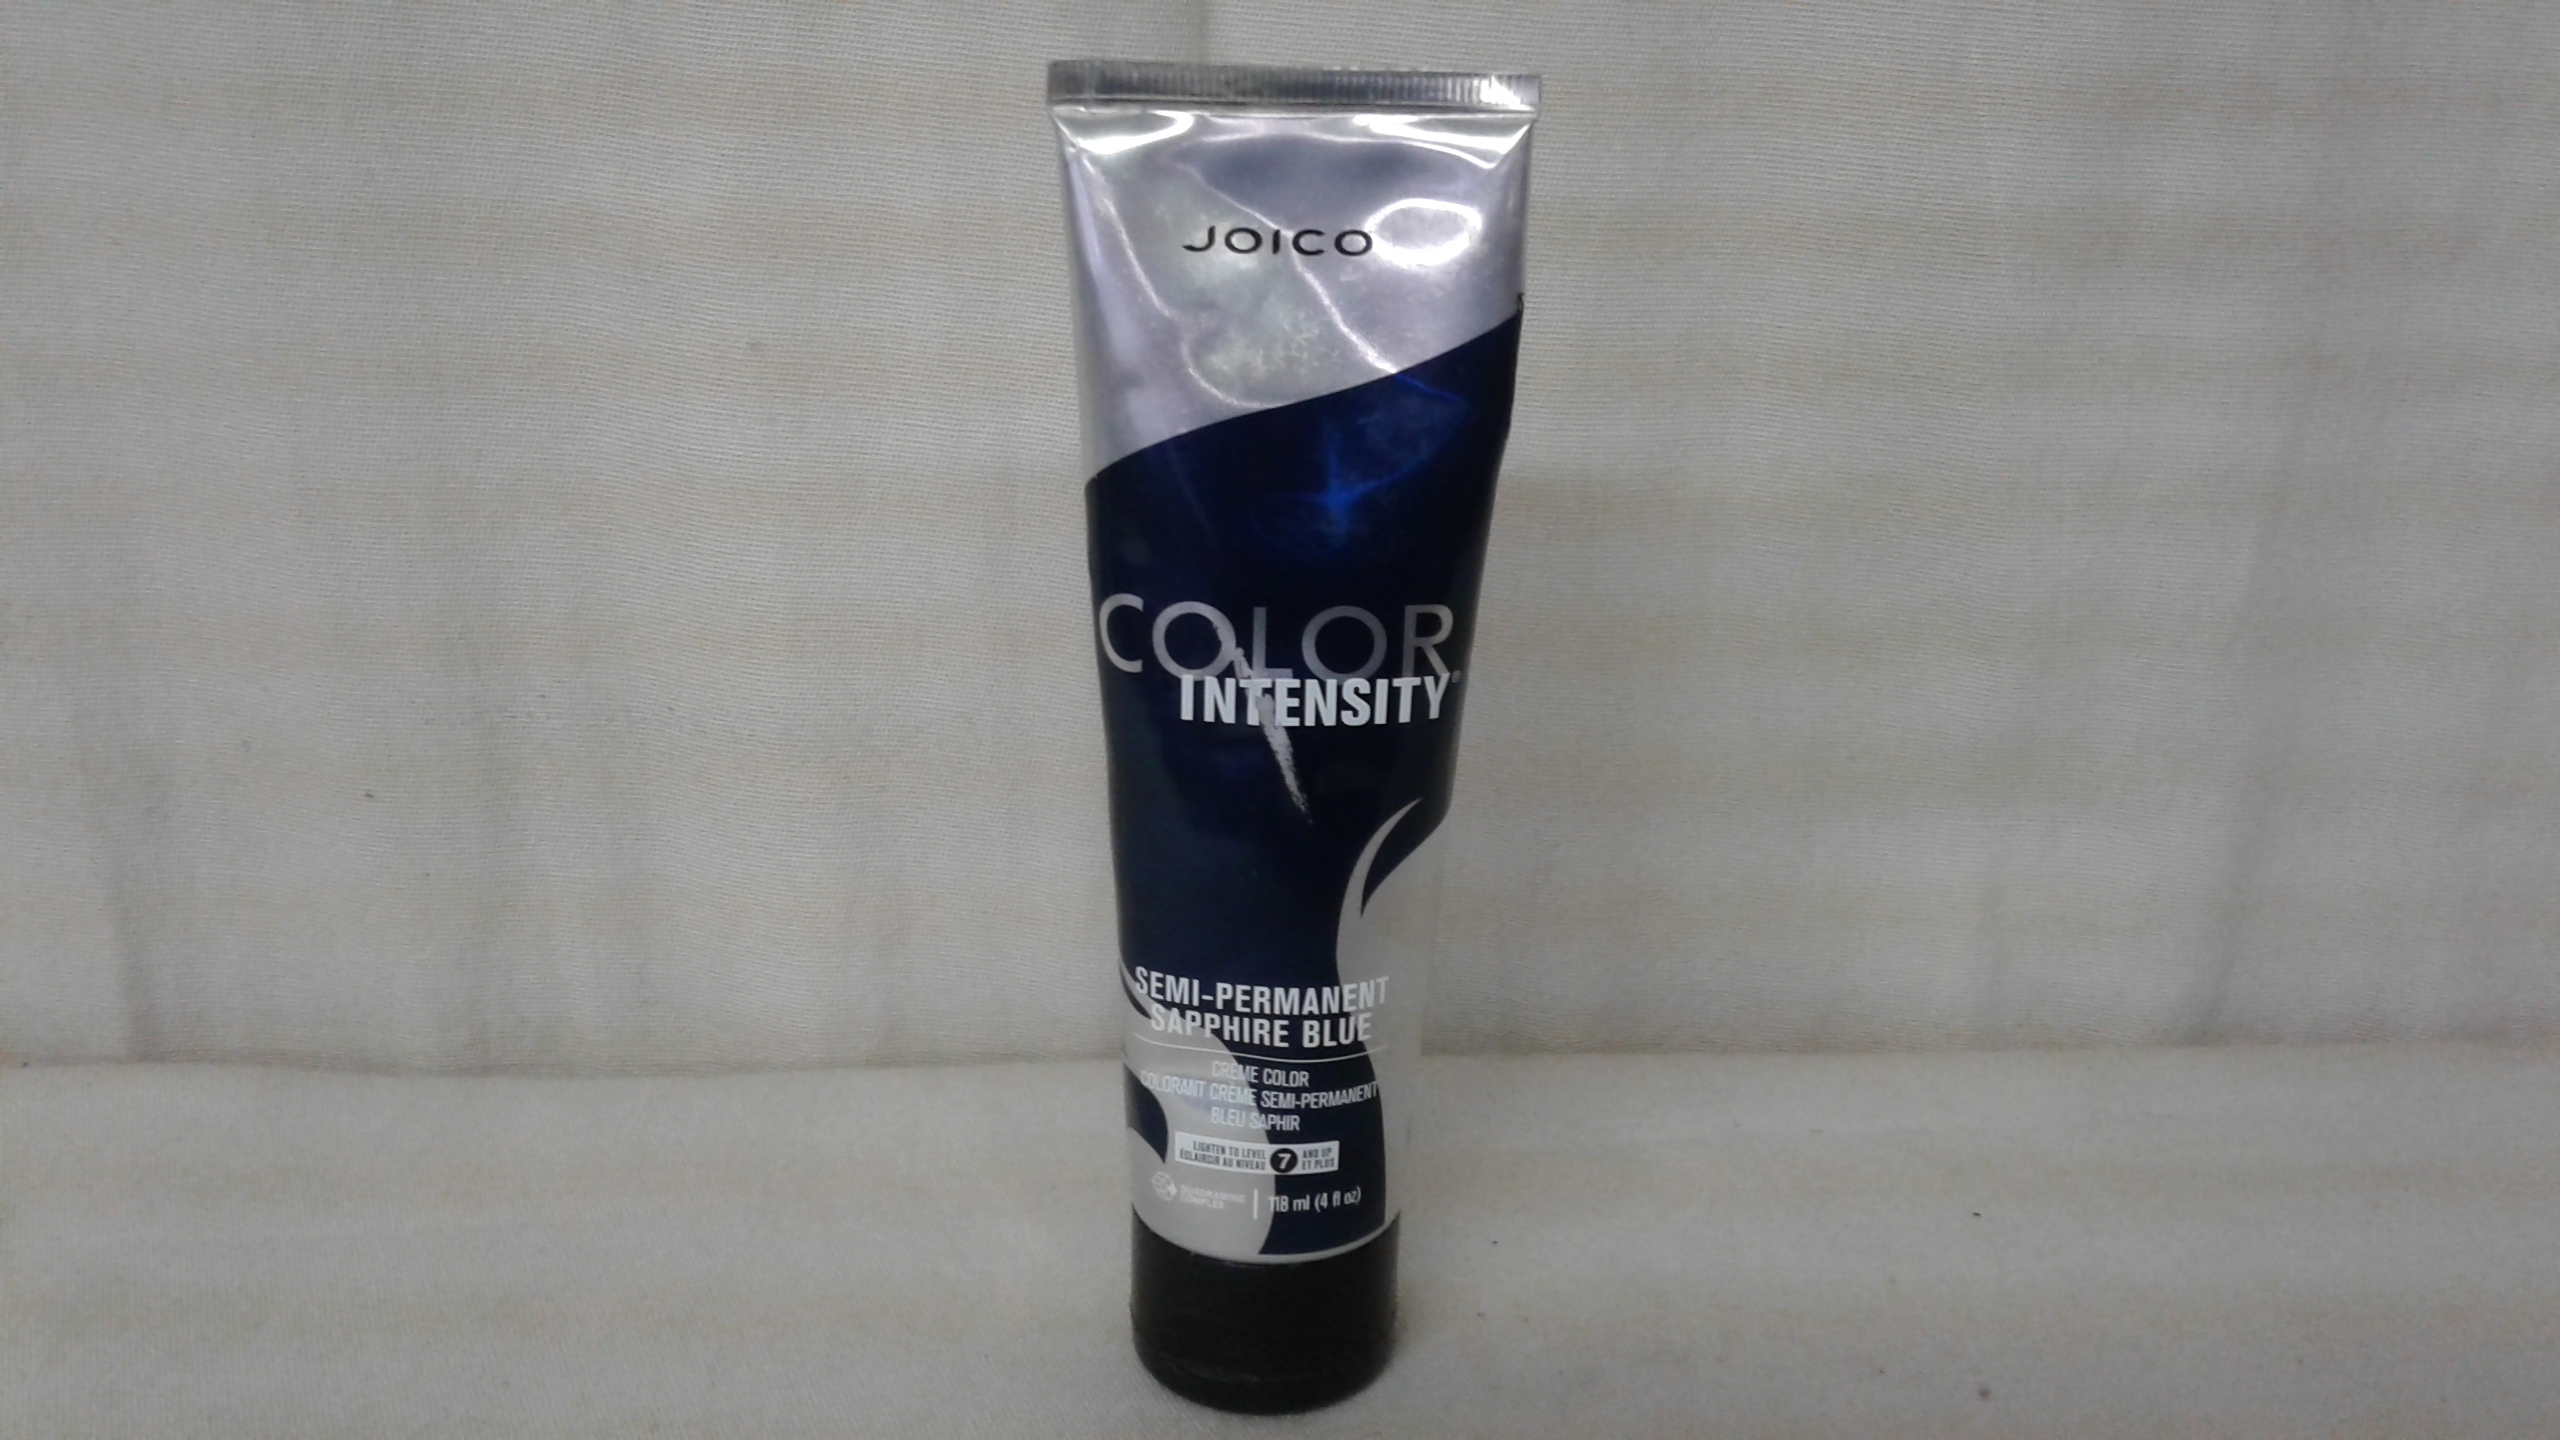 4. Joico Intensity Semi-Permanent Hair Color - 4 Ounce - wide 2